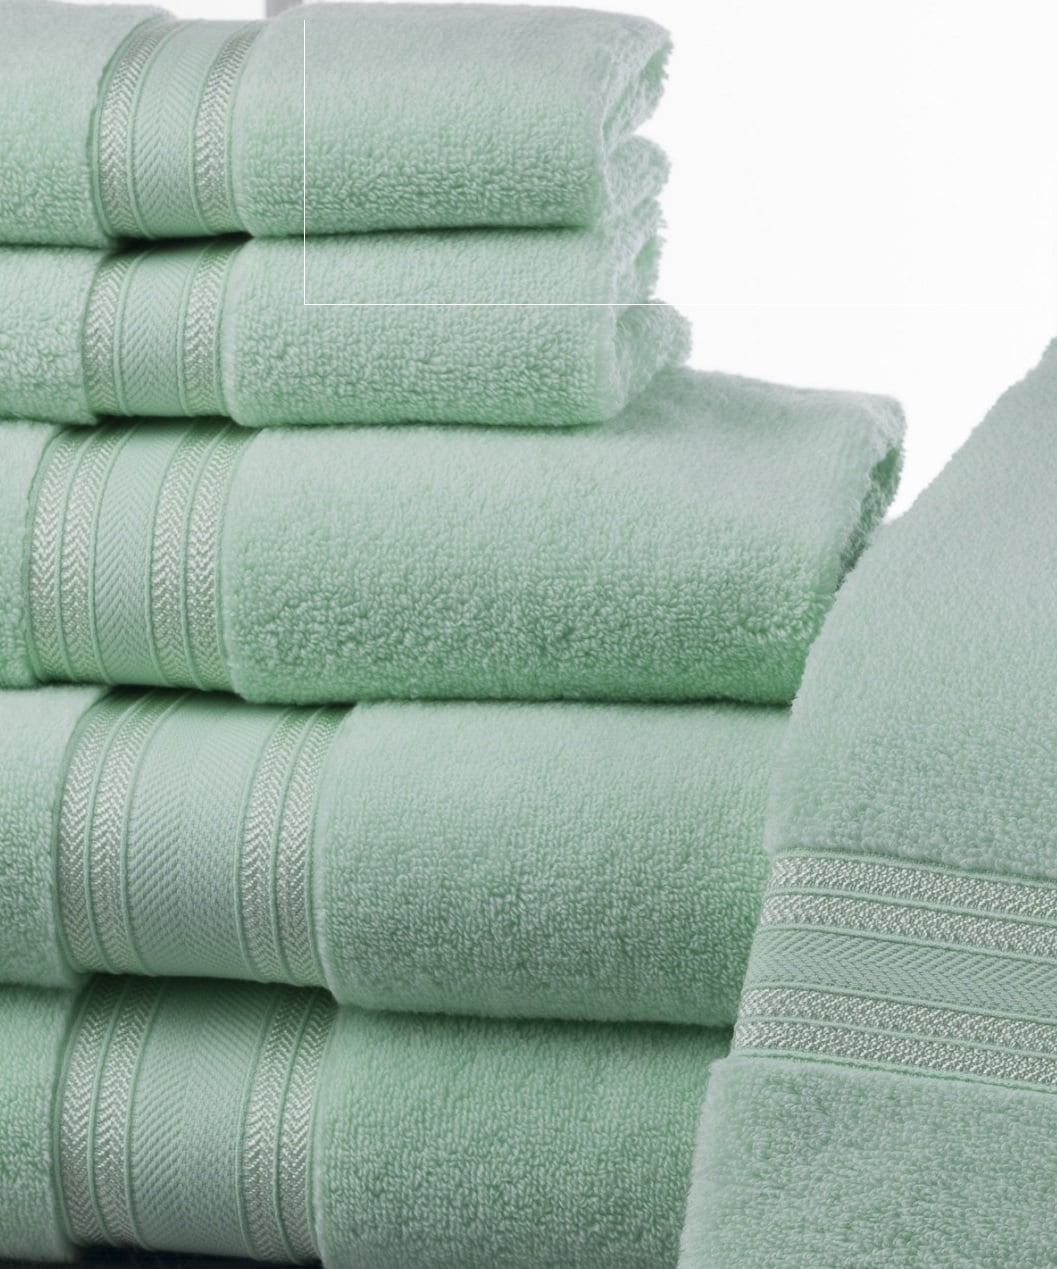 Beauty Threadz 100% Cotton 8-Piece Towel Set - Seafoam Green - 2 Bath Towels,  2 Hand Towels, and 4 Washcloths - Super Soft, High Quality, High-Absorbent,  and Fade-Resistant. (400 GSM) 